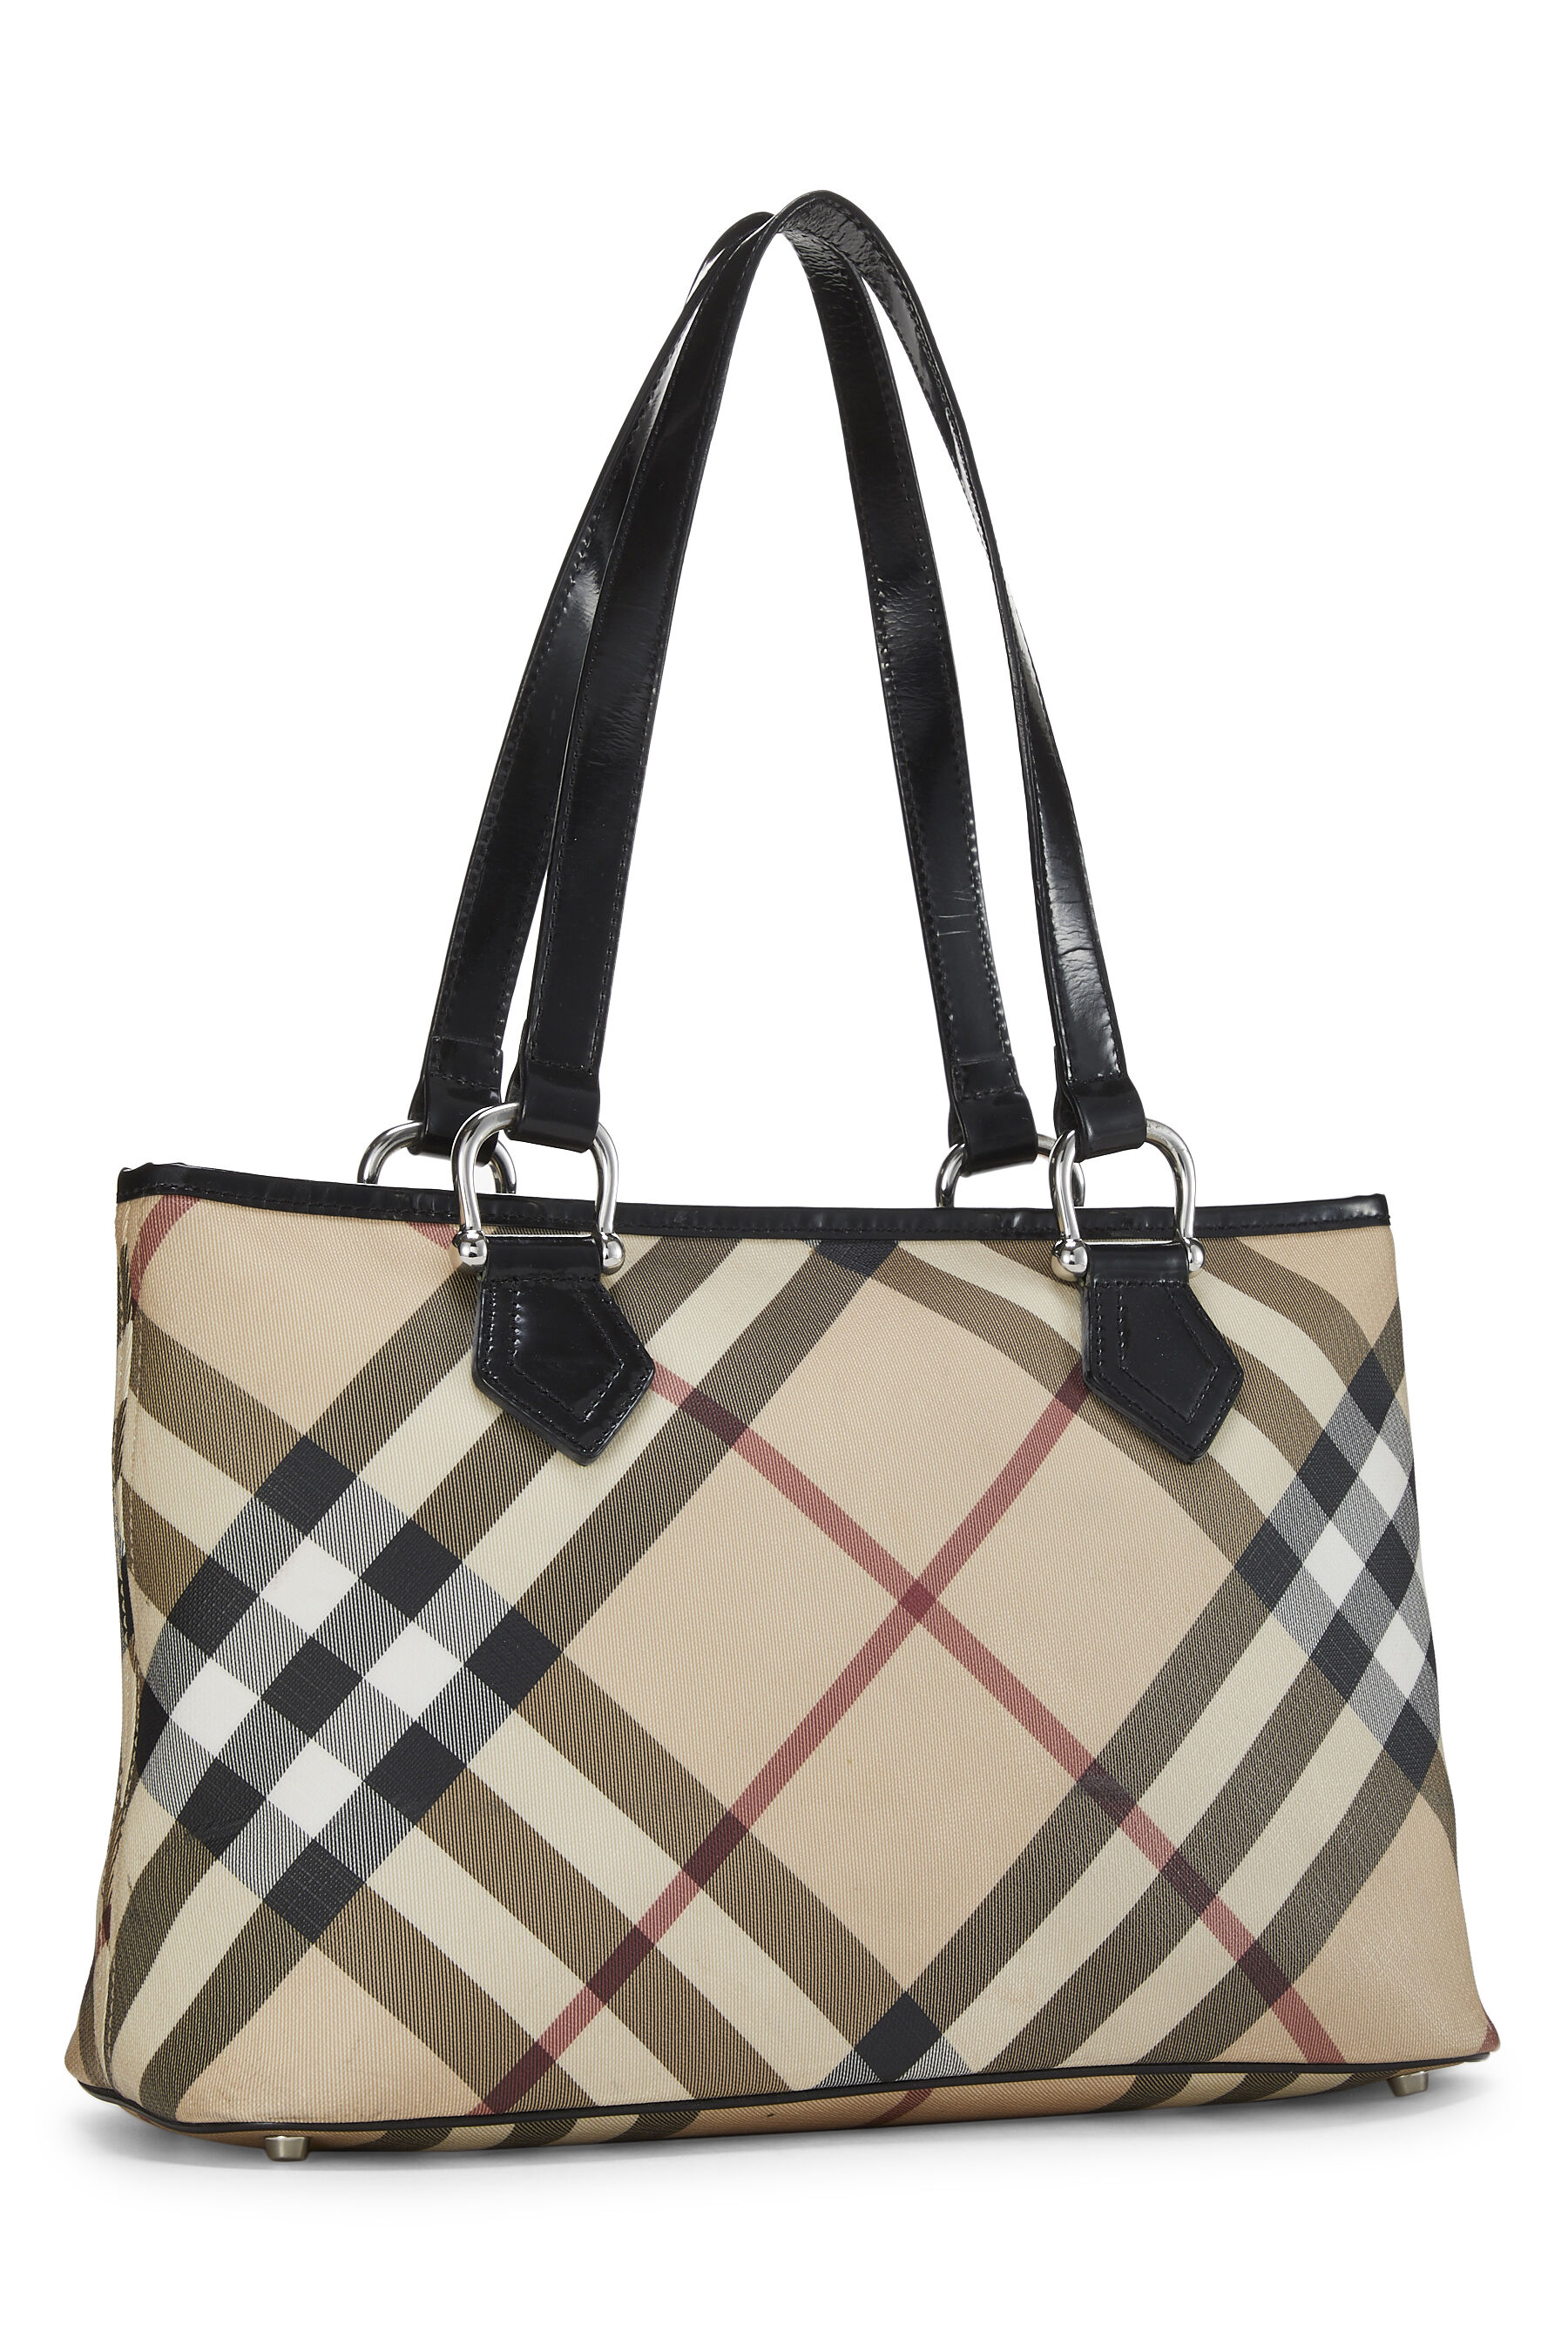 Burberry Beige/Brown Mega Check Canvas and Leather Lowry Tote Burberry